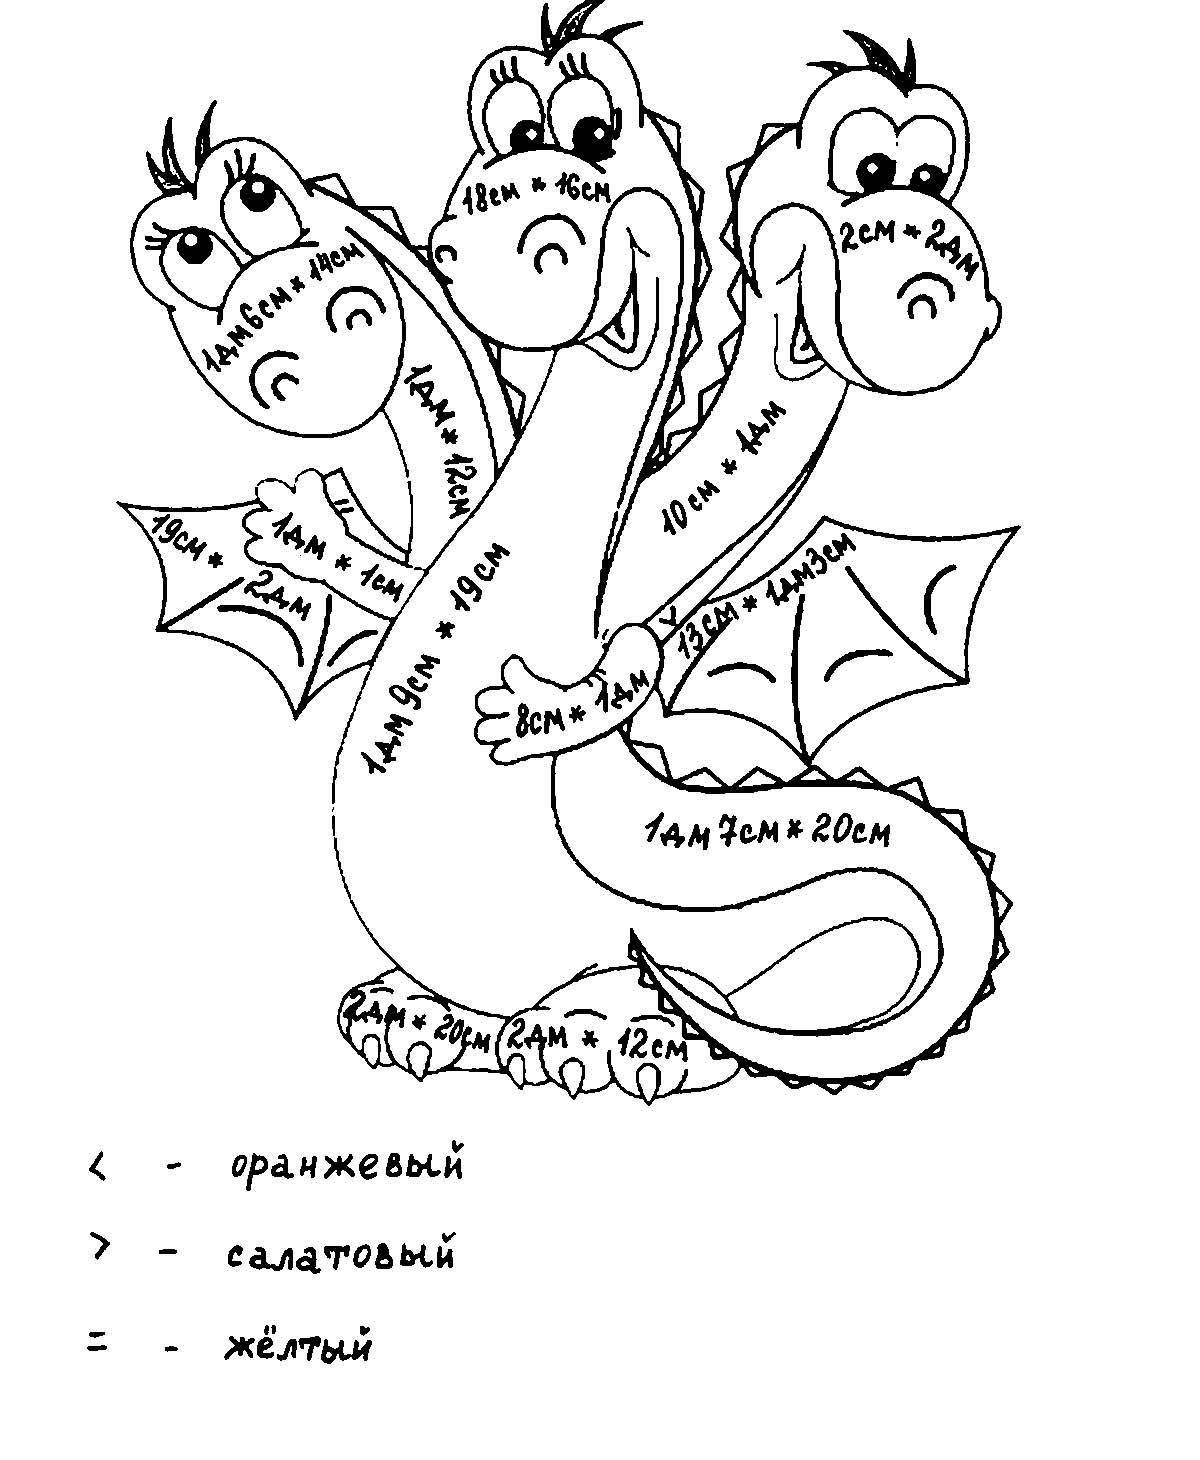 Coloring pages for grade 1 with dragon examples